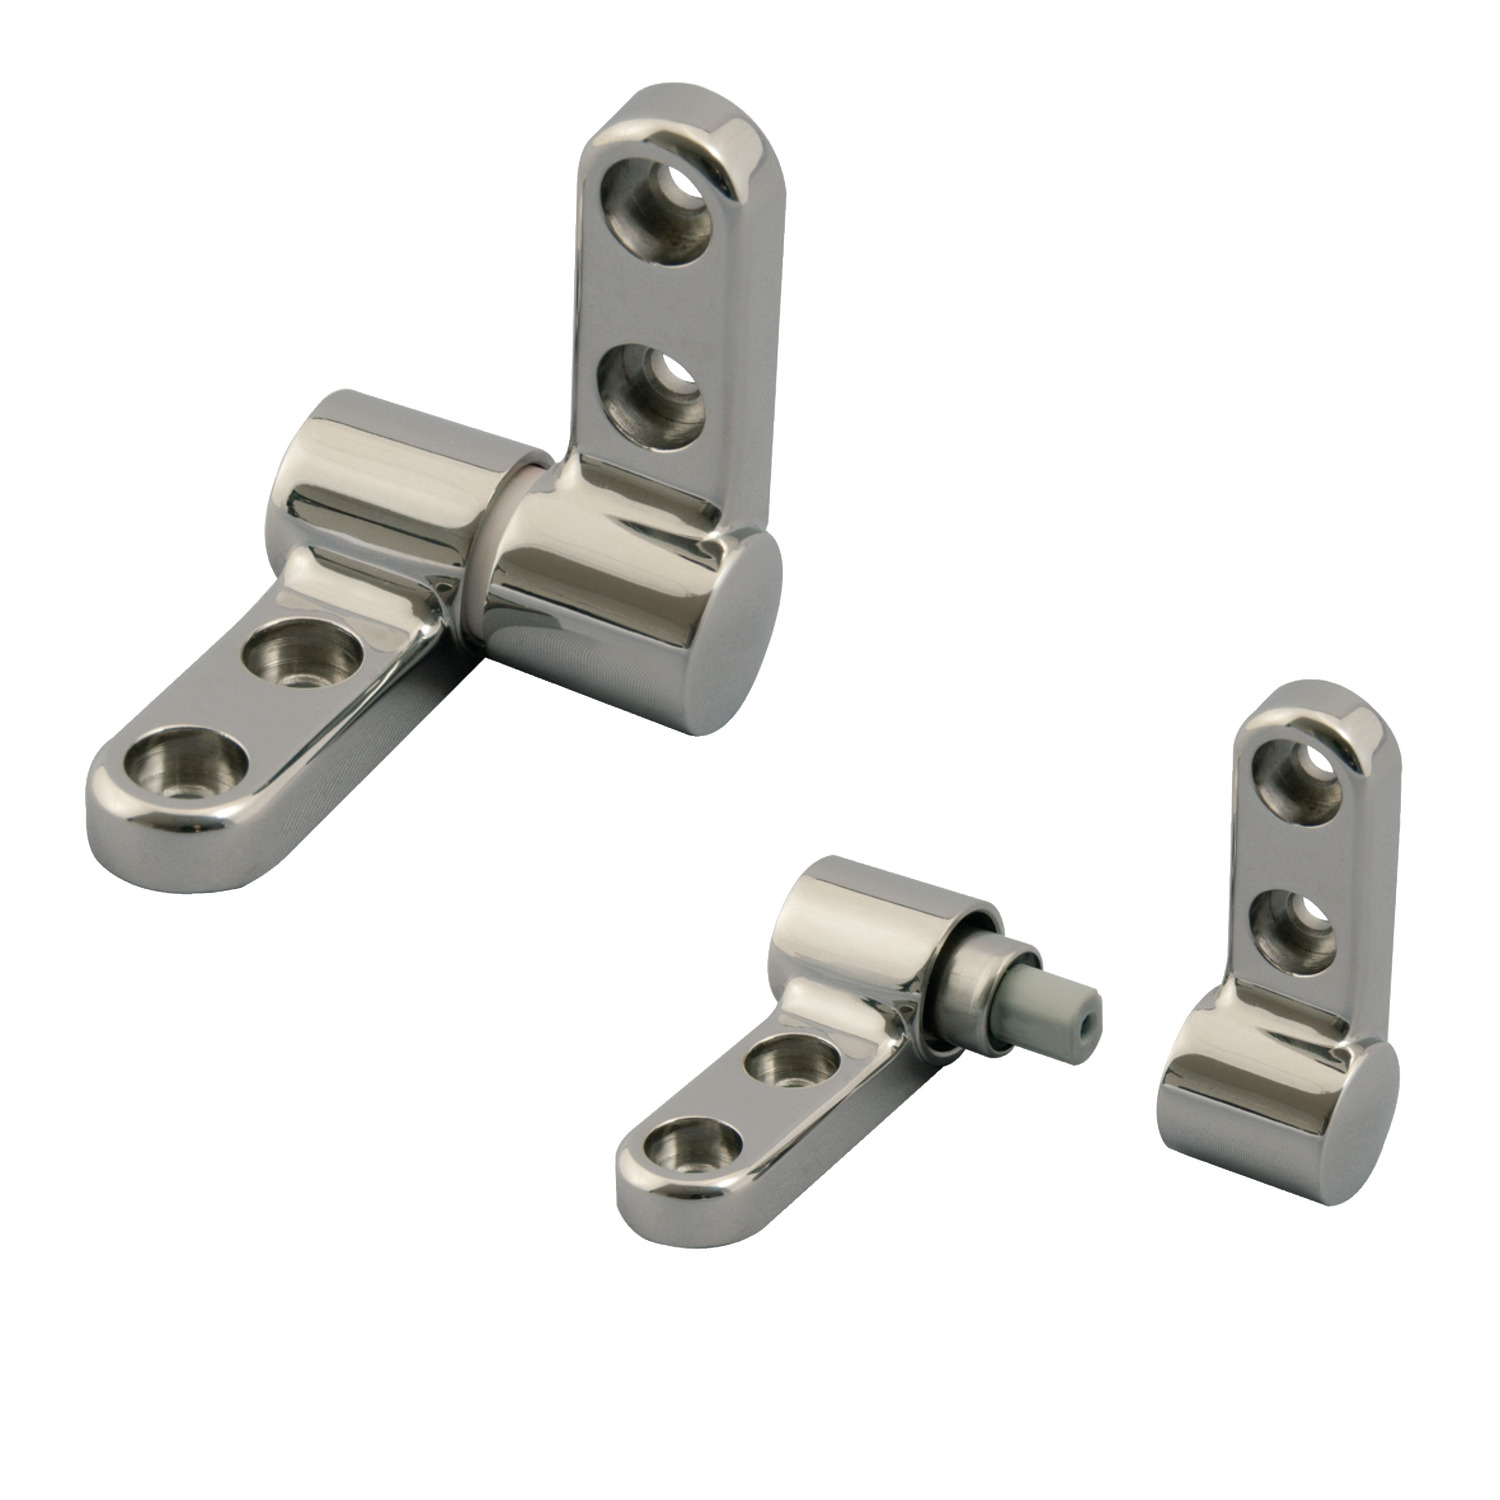 Product Q1010, Soft Closing Hinge Set - Complete with torque dampers - 115° operating angle / 